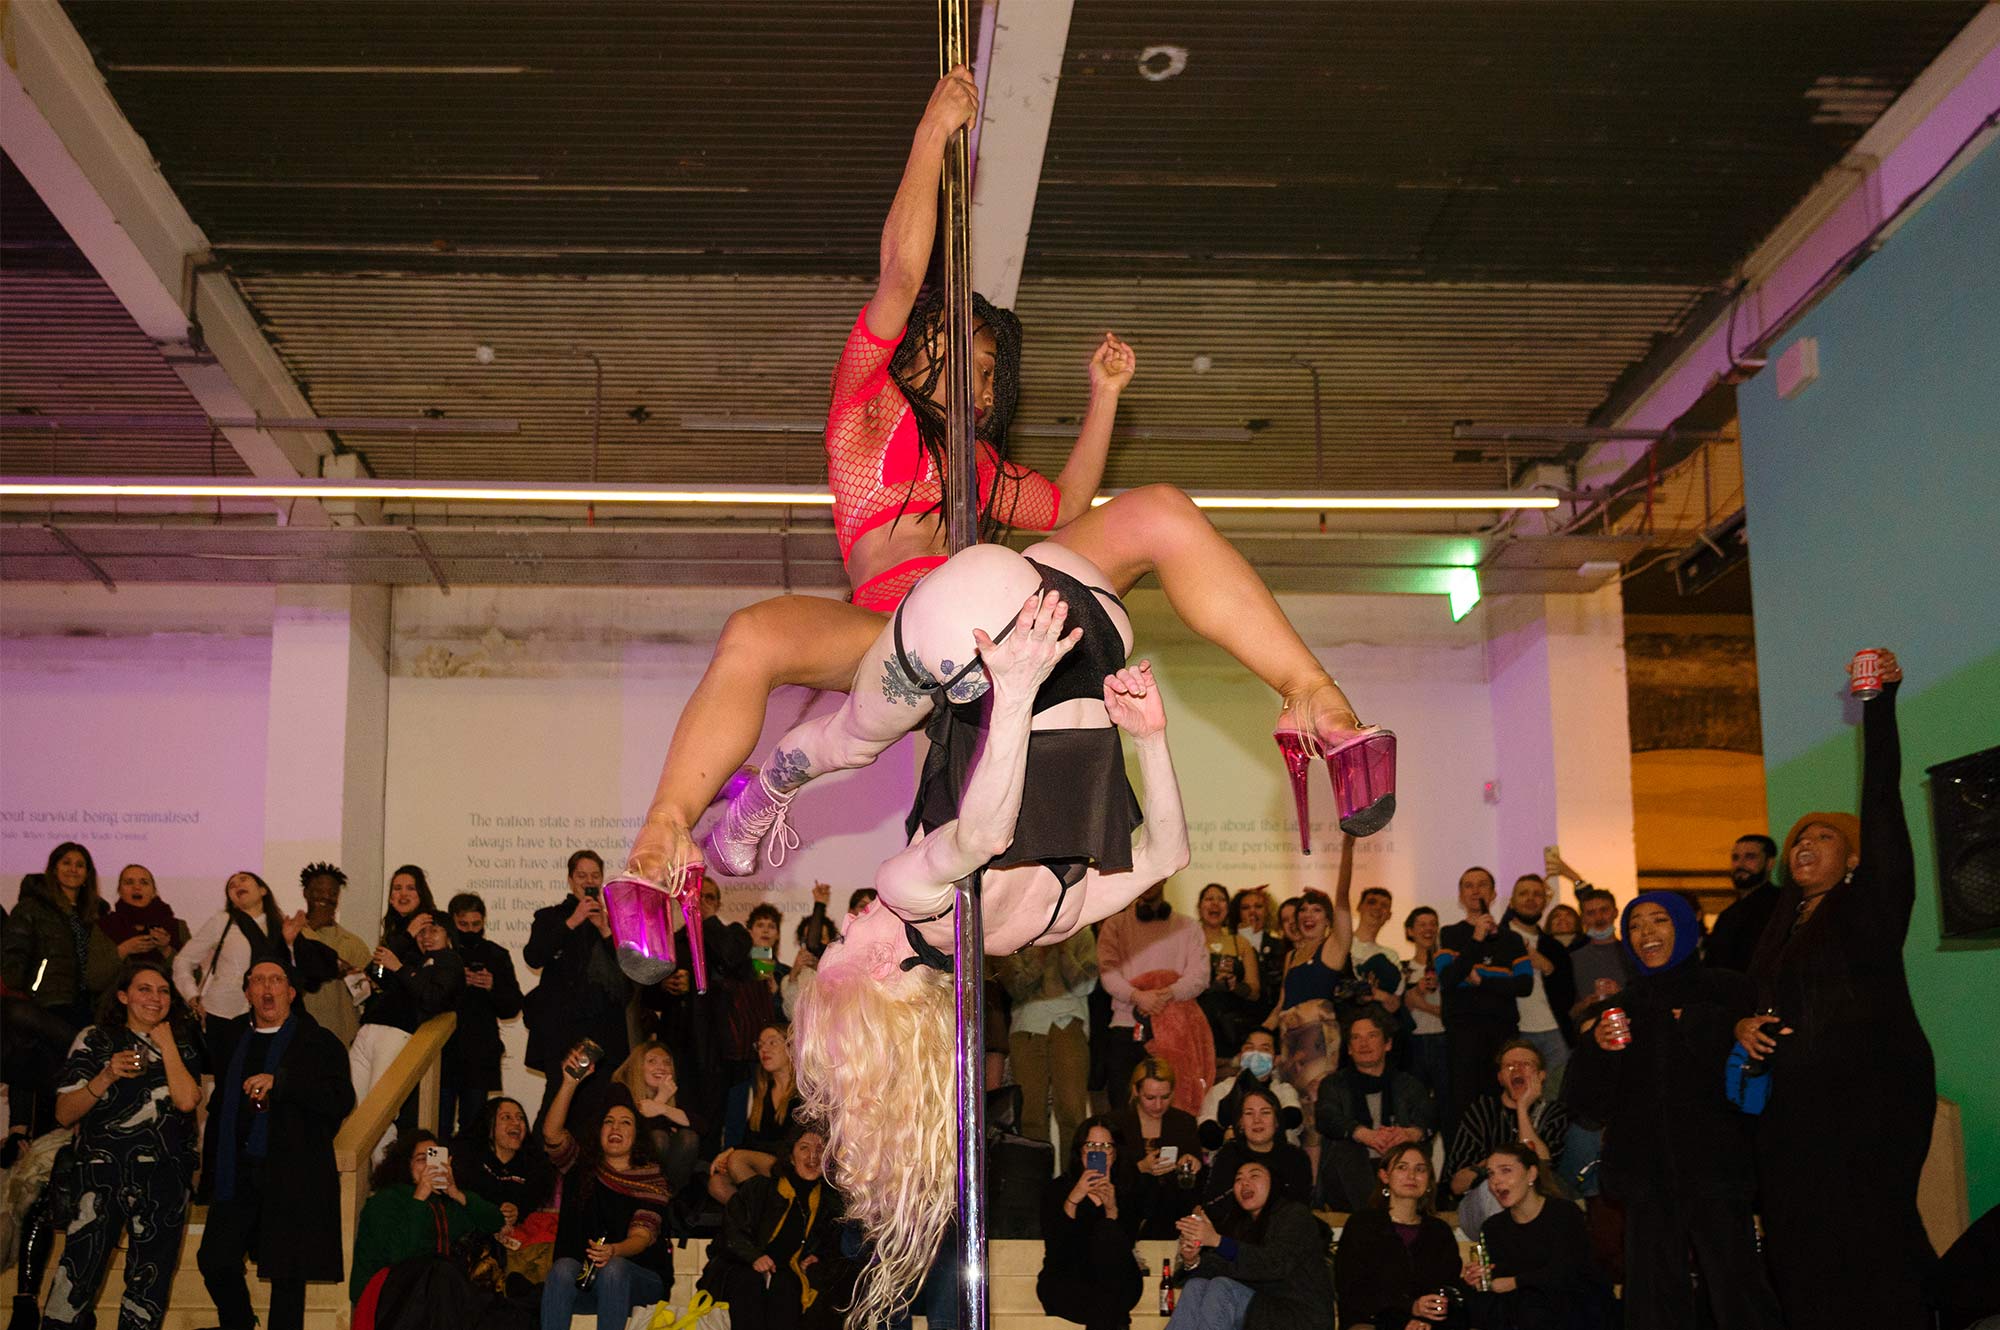 Two dancers in reverse, vertically, on a pole. A crowd cheers in the background.